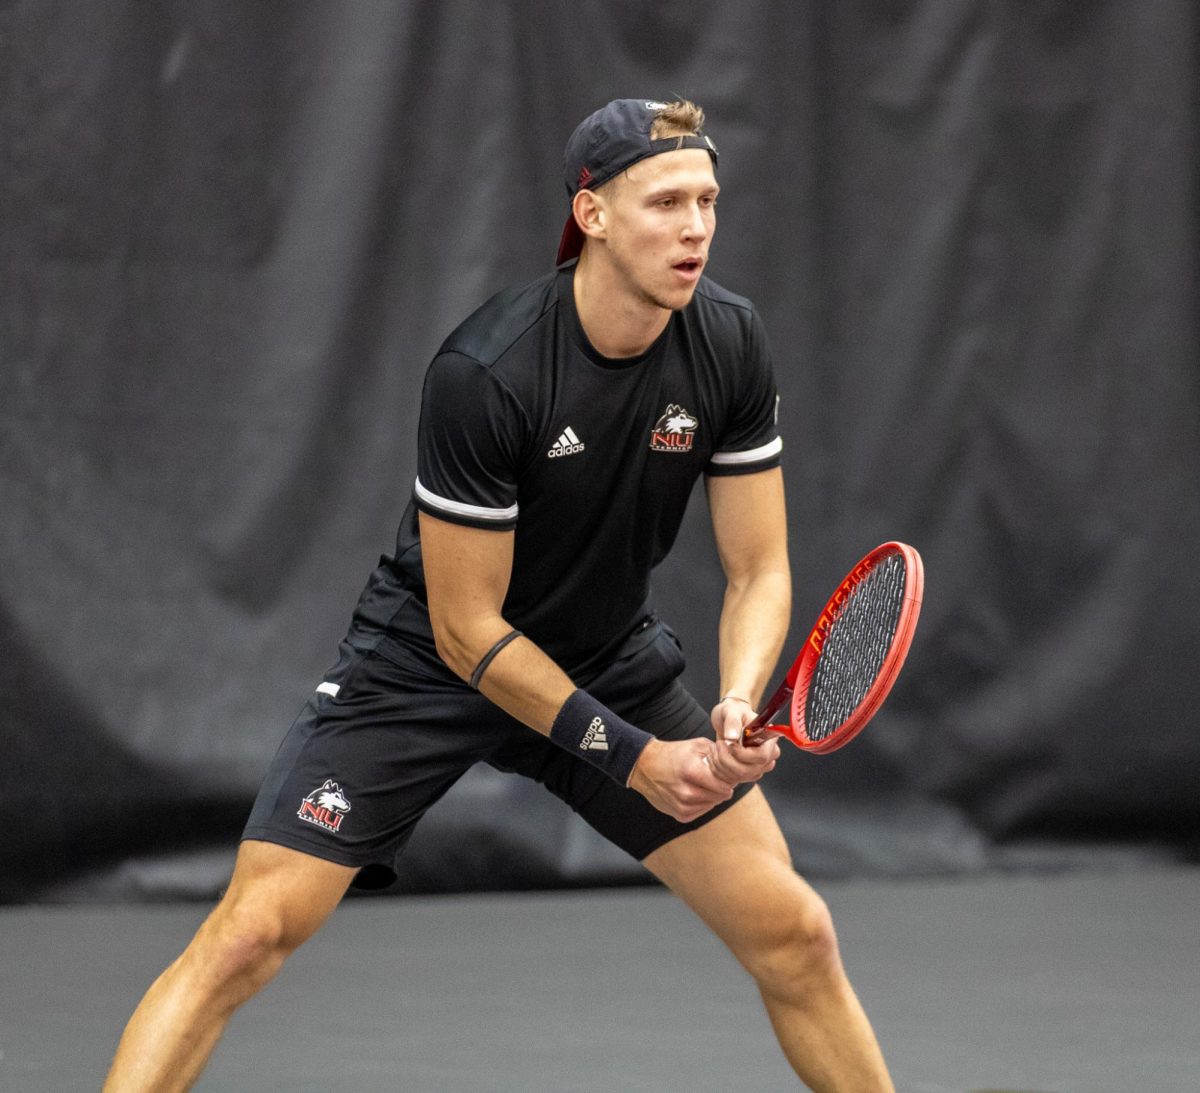 NIU+senior+Mikael+Vollbach+gets+set+to+receive+the+serve+during+singles.+Vollbach+scored+the+Huskies%E2%80%99+second+point+in+a+tight+match+that+went+to+a+second+set+tiebreaker+as+he+defeated+University+of+Nebraska+Omaha+sophomore+Ryoma+Mishiro+with+scores+of+6-4%2C+7-6+and+7-5.+%28Tim+Dodge+%7C+Northern+Star%29